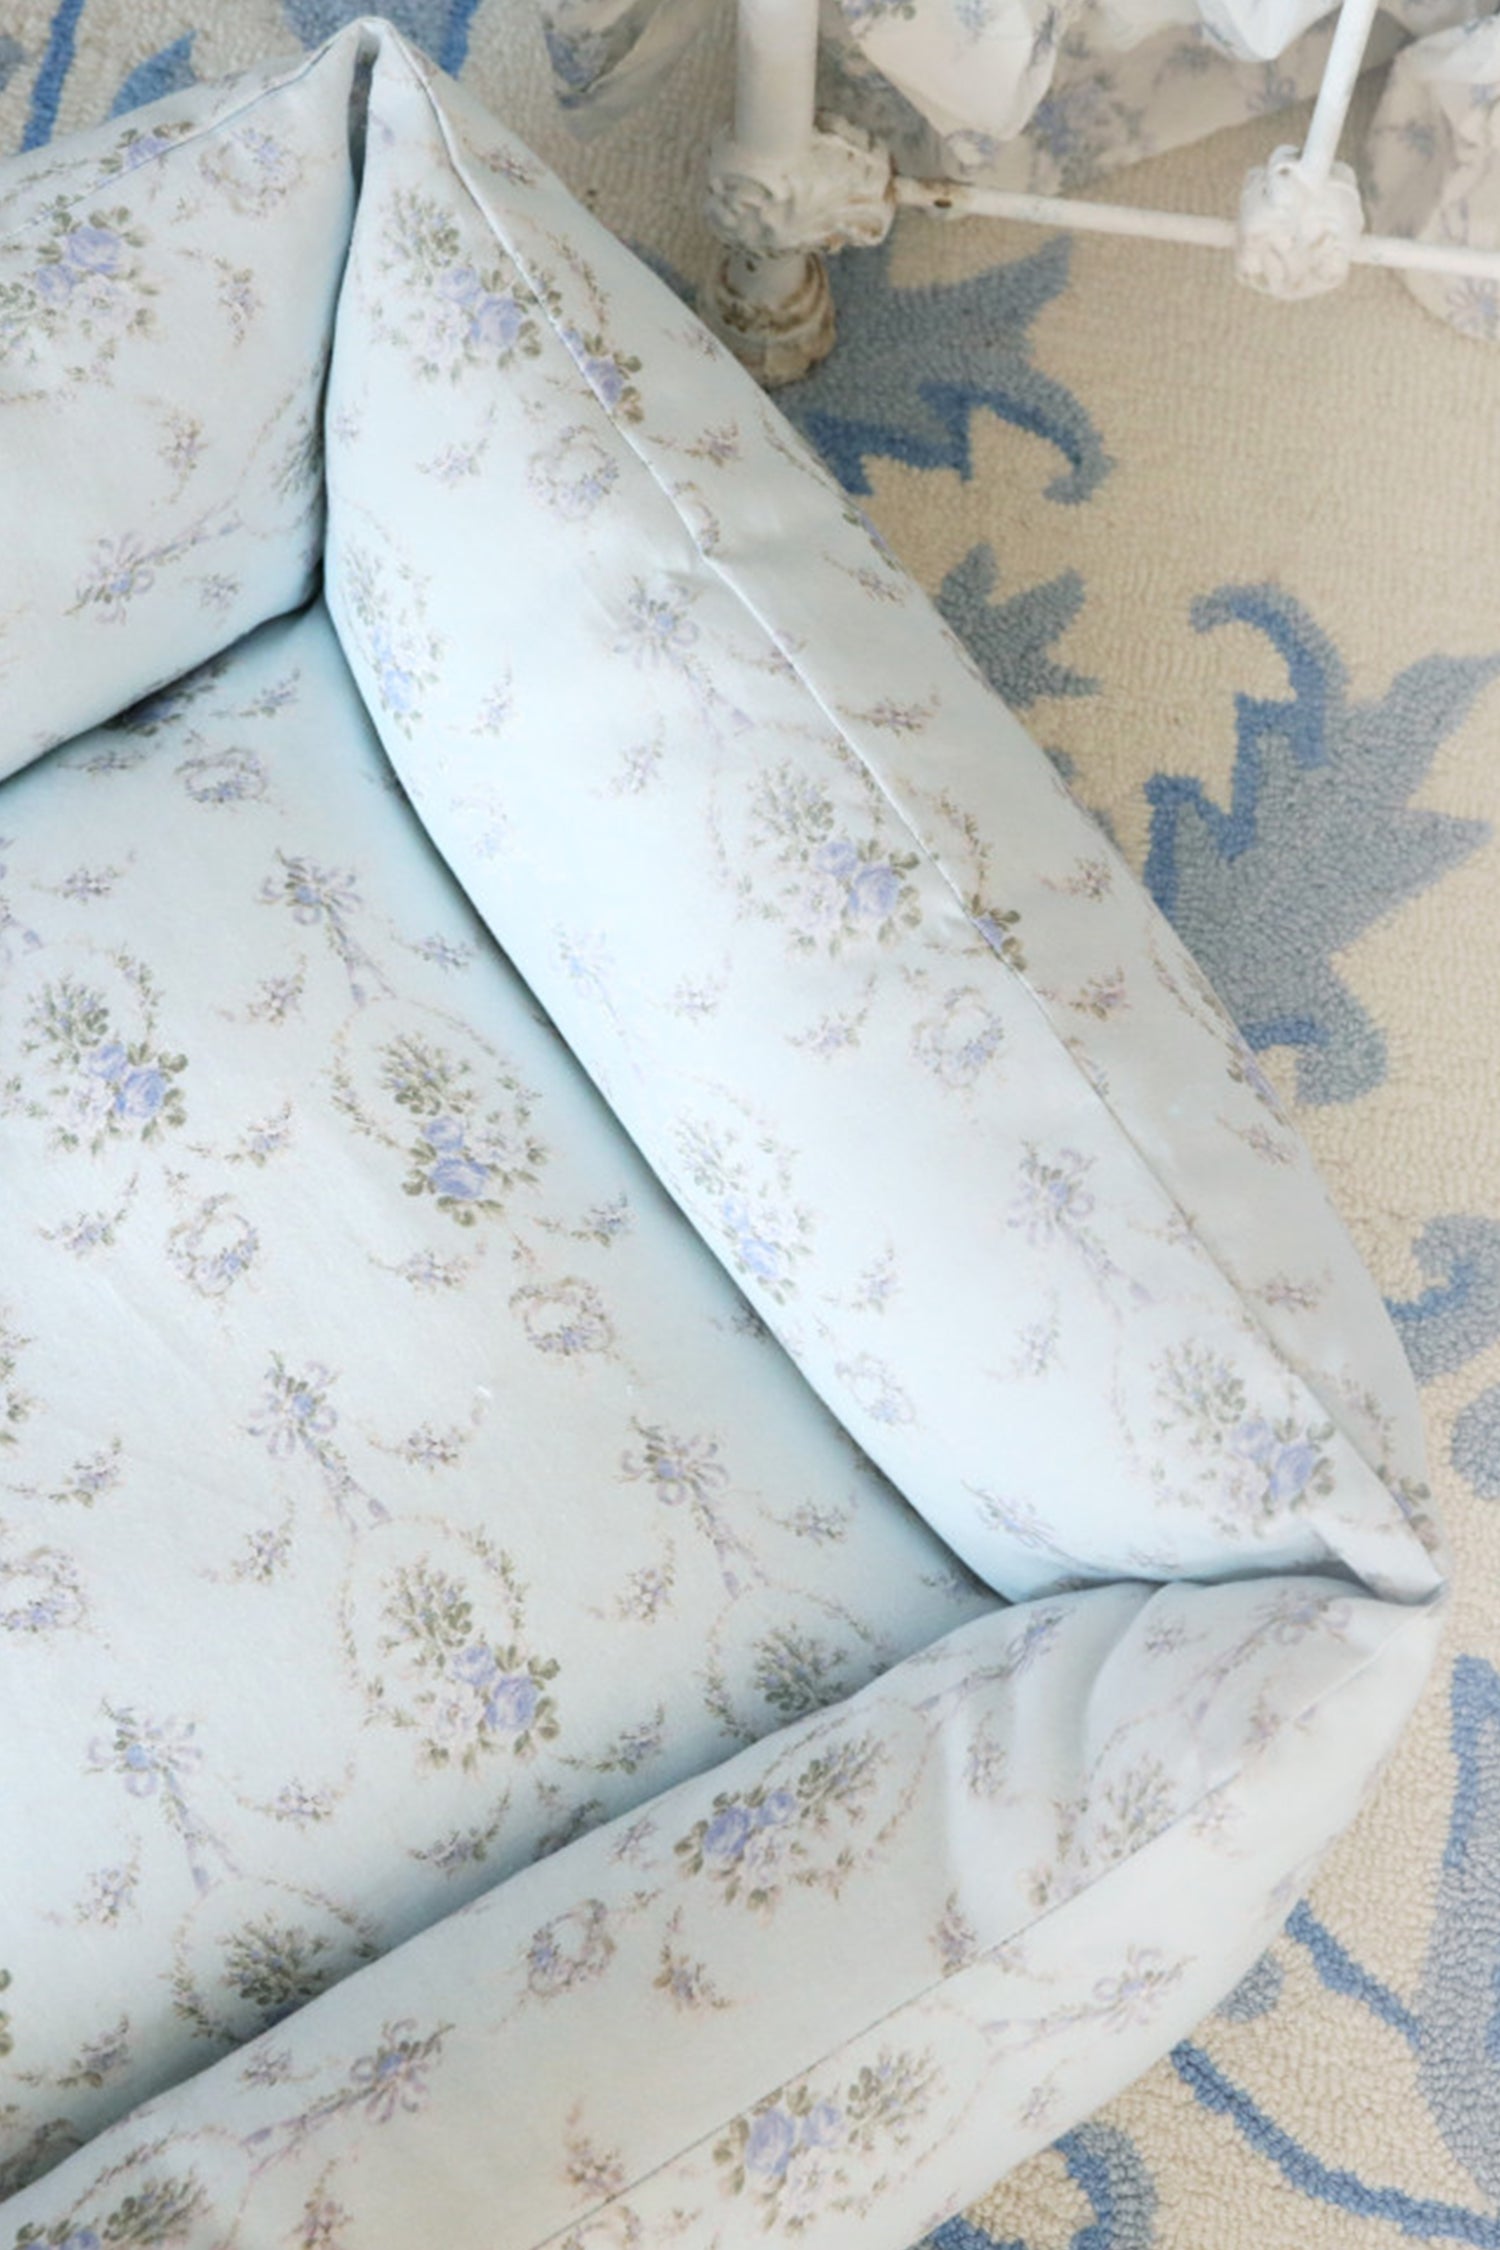 Introducing a vintage-inspired print, dog bed in a soft blue shade, crafted from high-quality linen